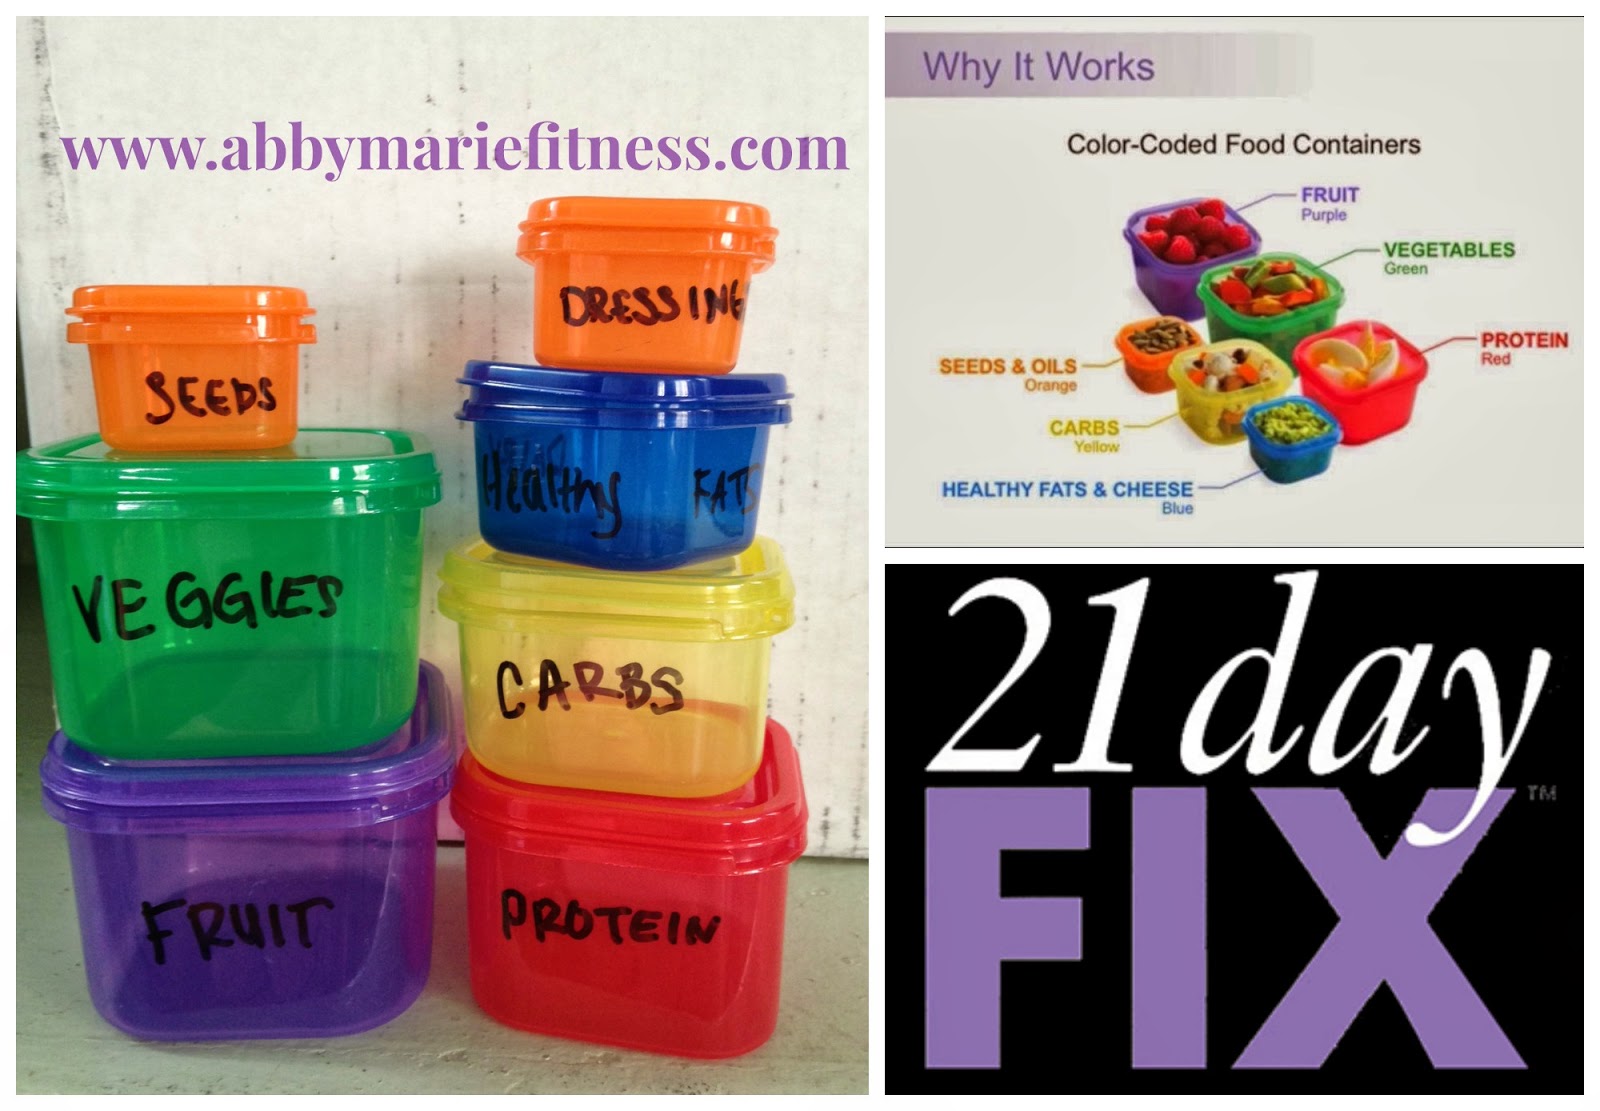 UNDERSTANDING THE 21 Day Fix CONTAINERS